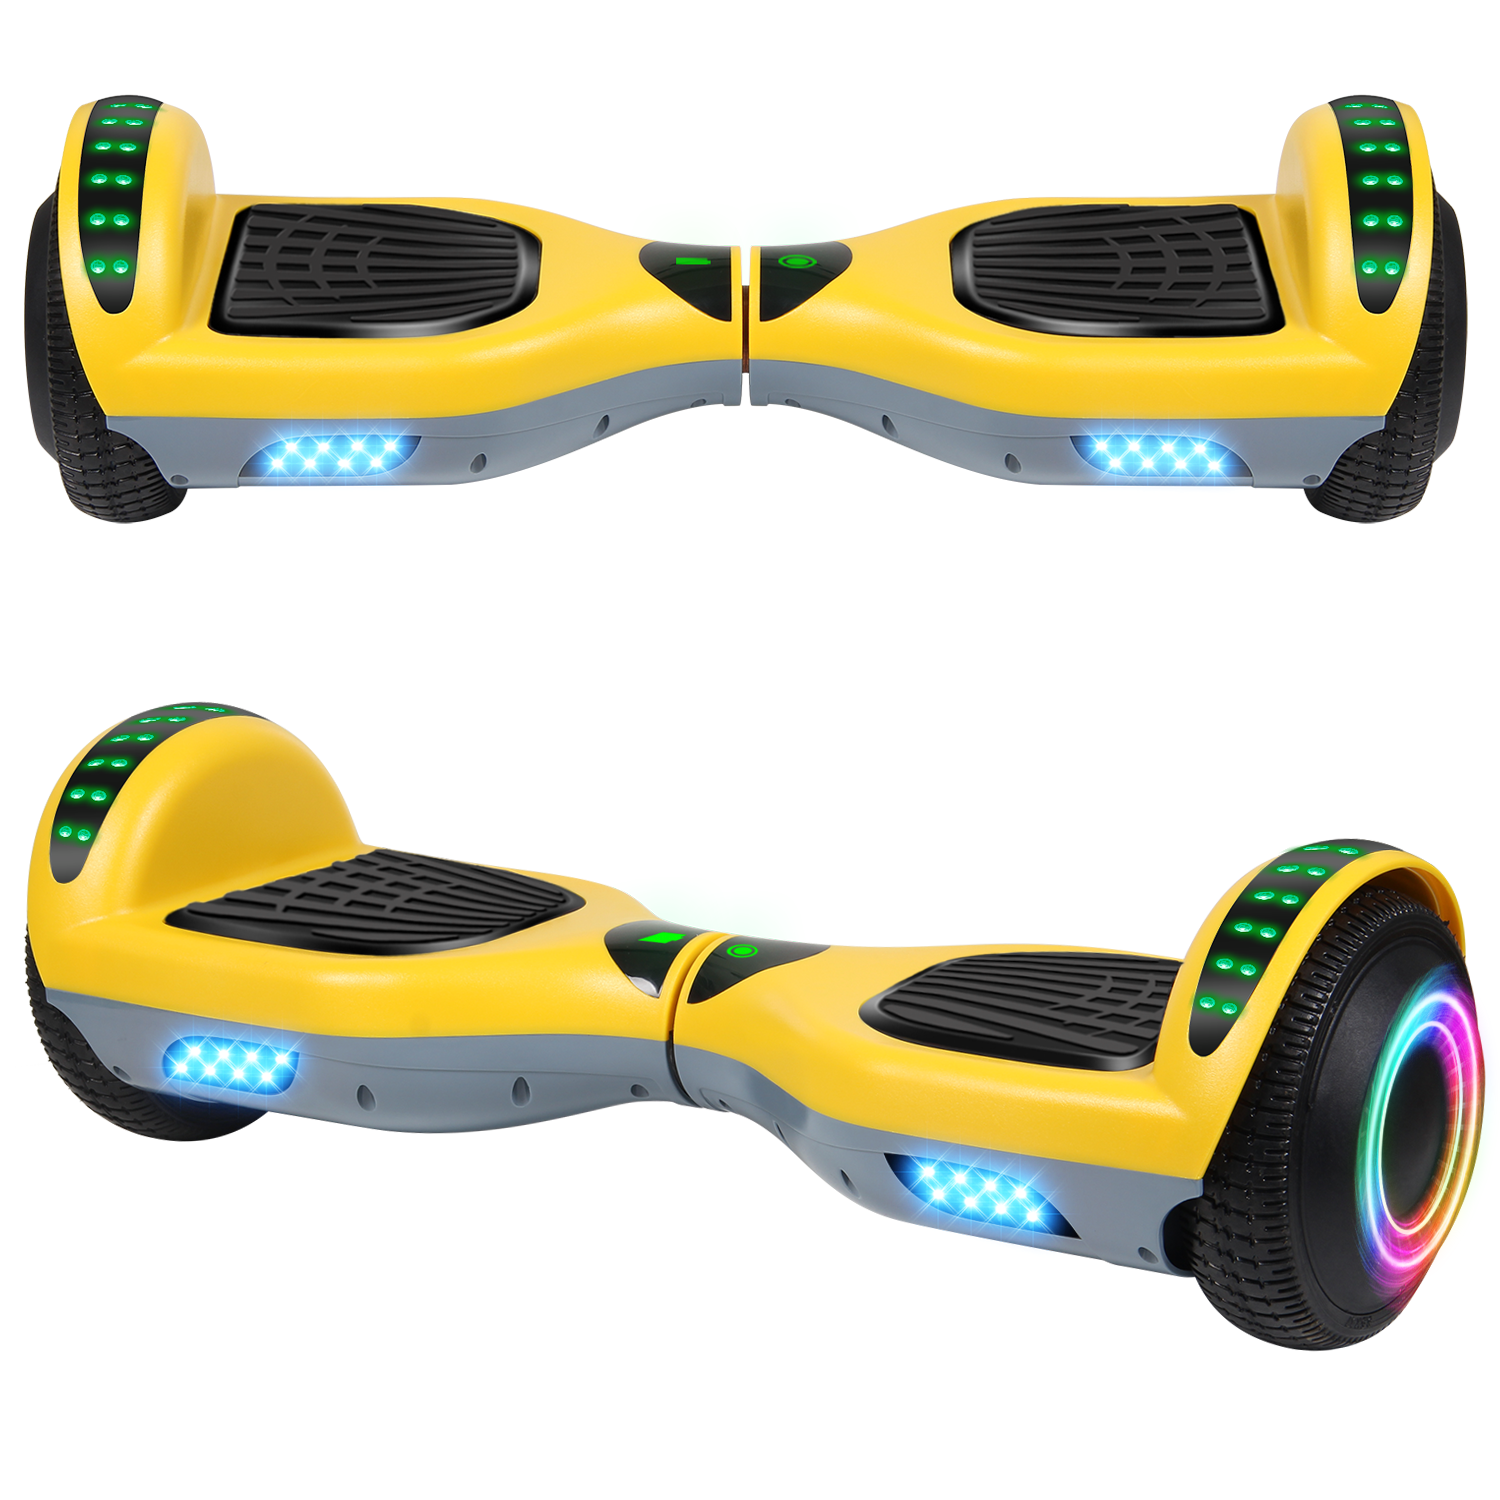 SISIGAD 6.5" Two-Wheel Self Balancing Hoverboard with Bluetooth and LED Lights Electric Scooter Hoverboard for Kids UL 2272 Certified Yellow and Gray